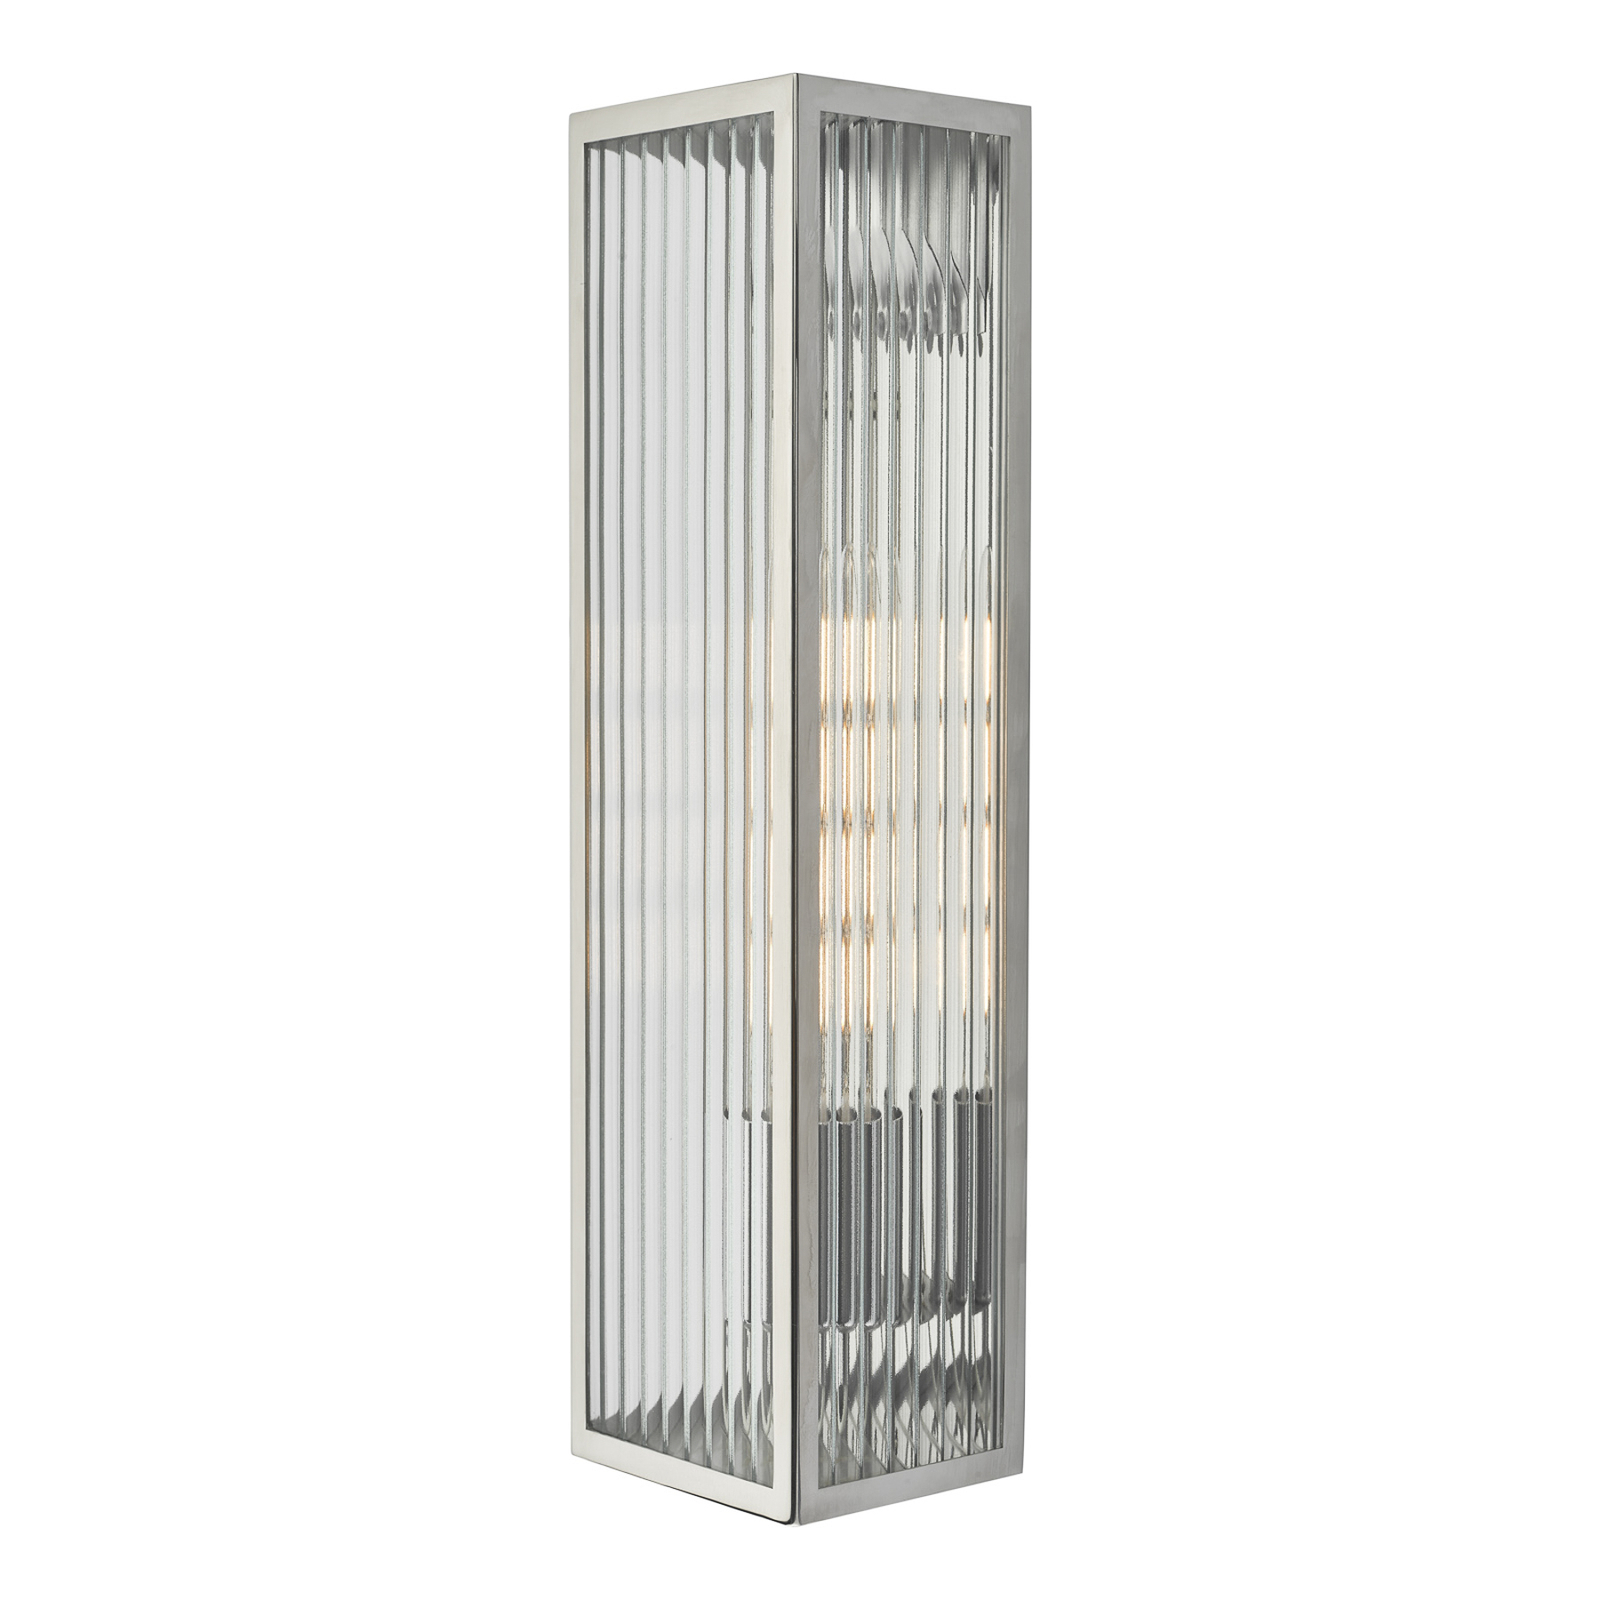 Keegan wall light with IP44 protection, stainless steel